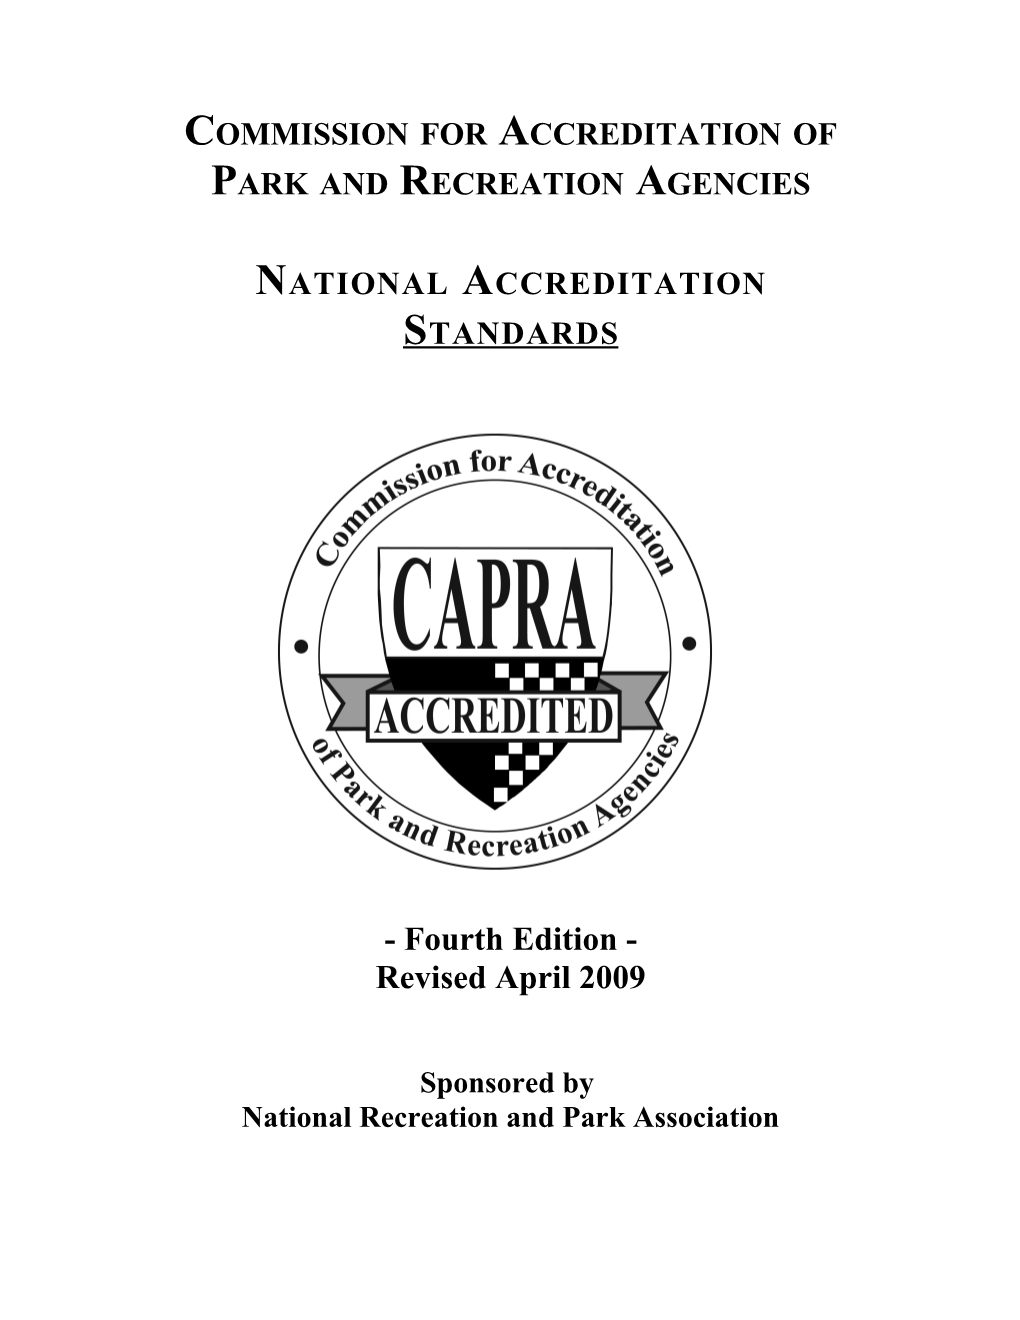 This Version of the Standards Includes All Proposed Changes with Those Edits Shown As Necessary